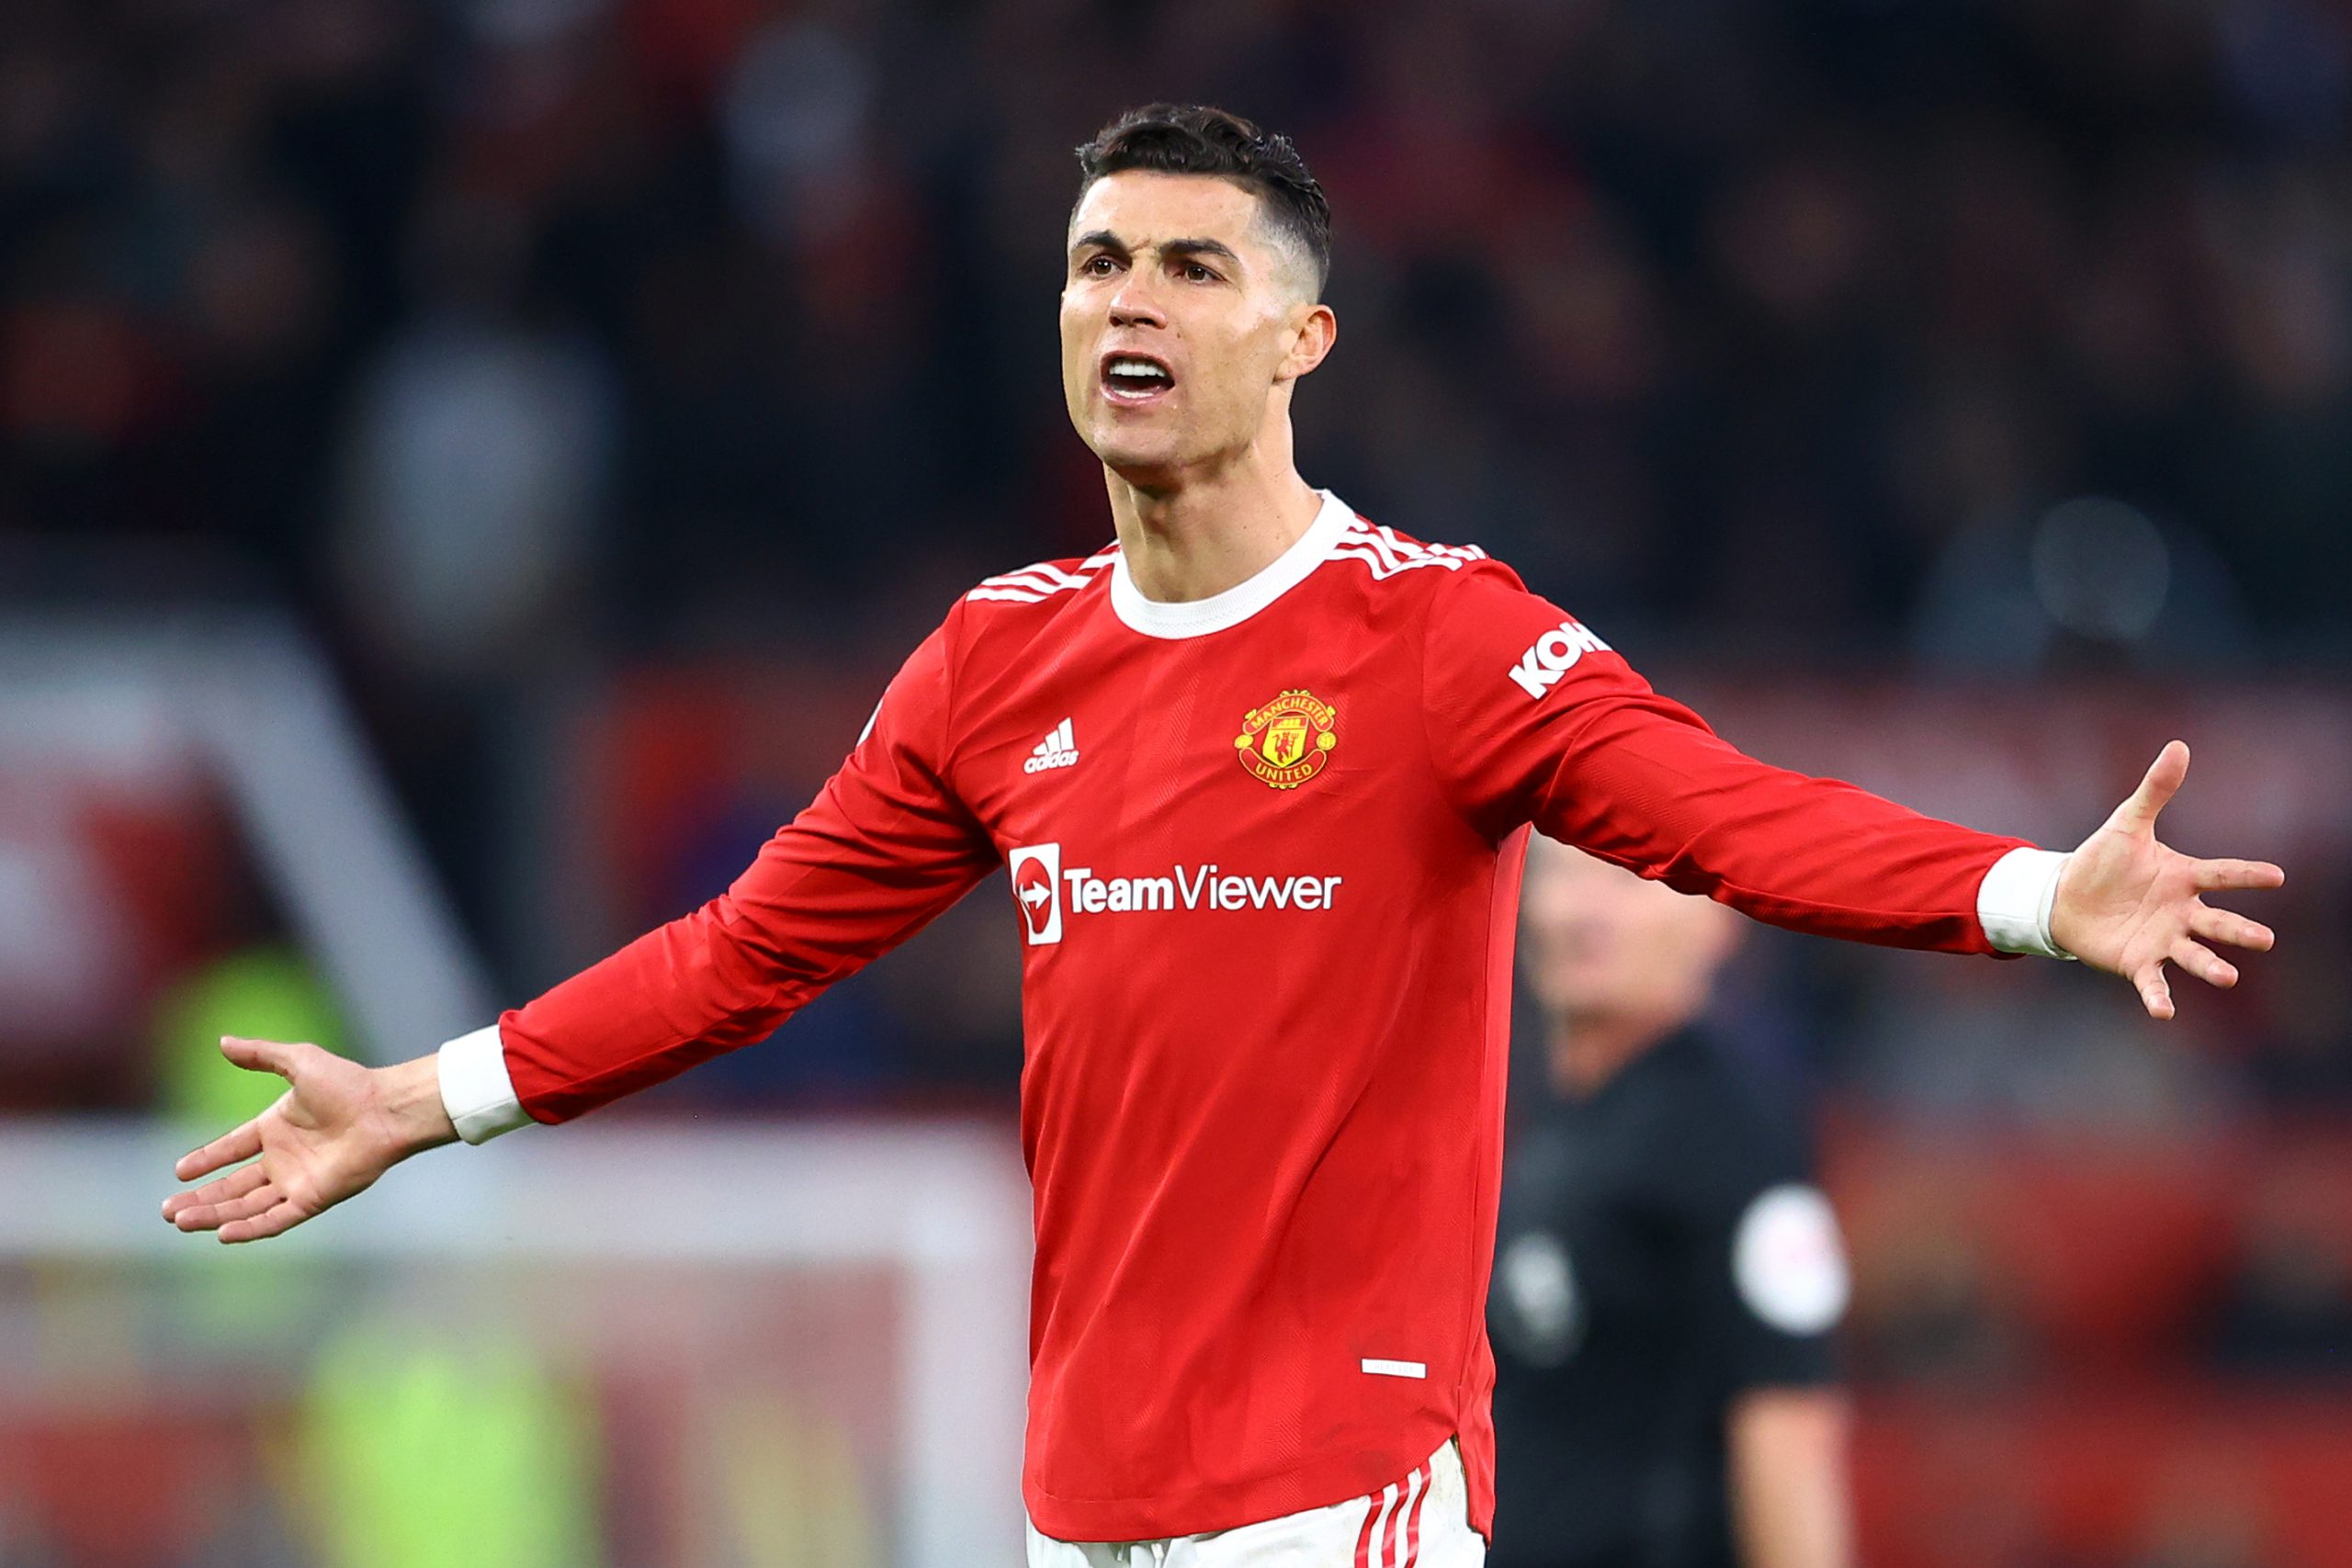 Cristiano Ronaldo joined Manchester United in the summer of 2021 from Juventus. (Photo by Michael Steele/Getty Images)